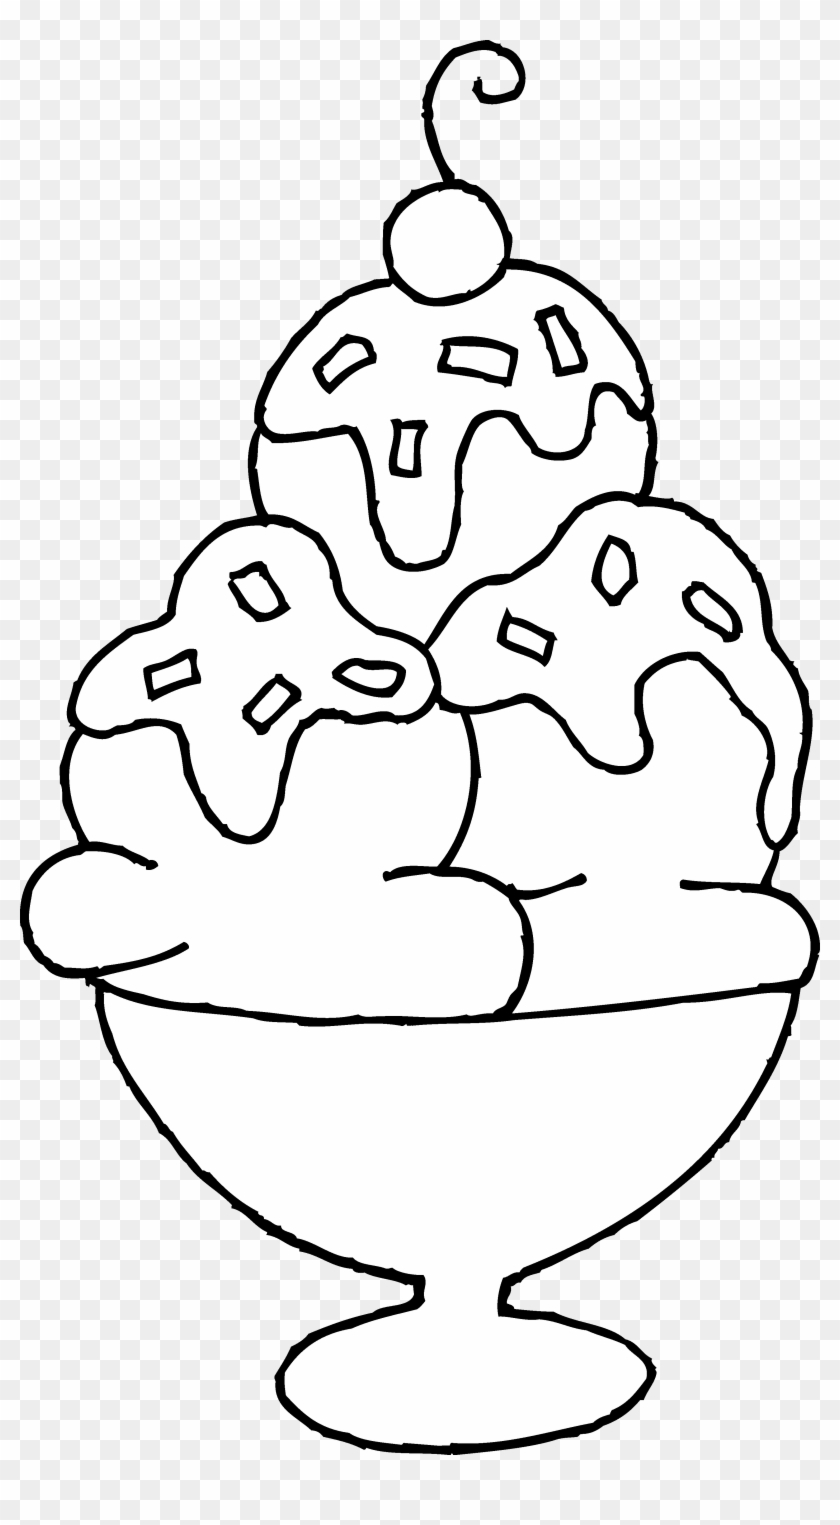 Best Photos Of Ice Cream Bowl Coloring Page - Ice Cream Sundae Drawing Clipart